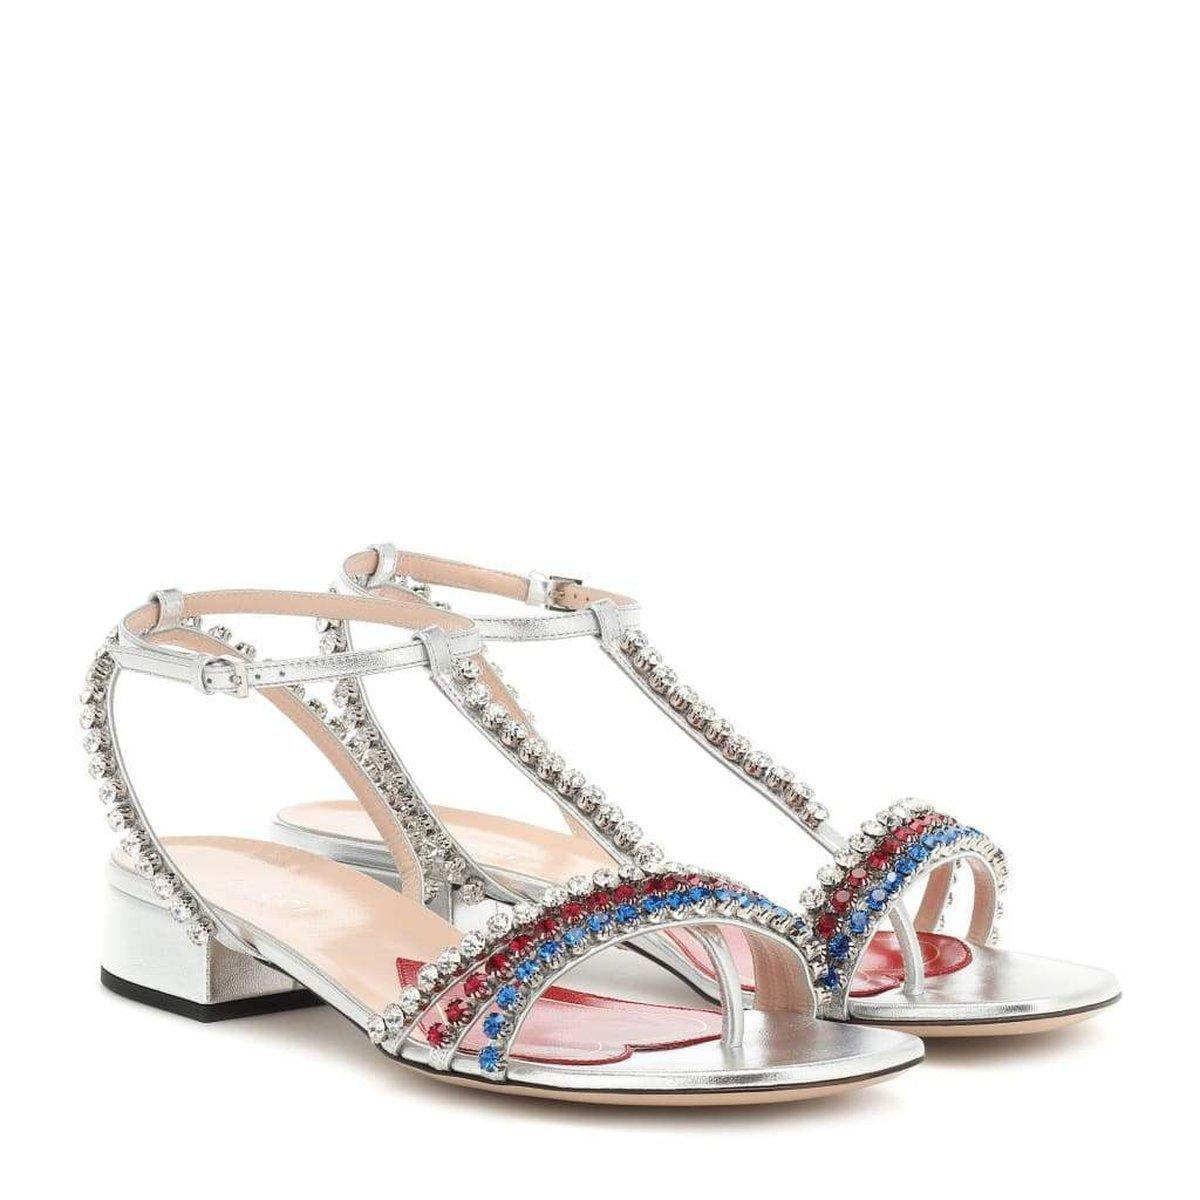 Gucci Bertie Embellished Metallic Leather Sandals IT 39 In New Condition For Sale In Brossard, QC